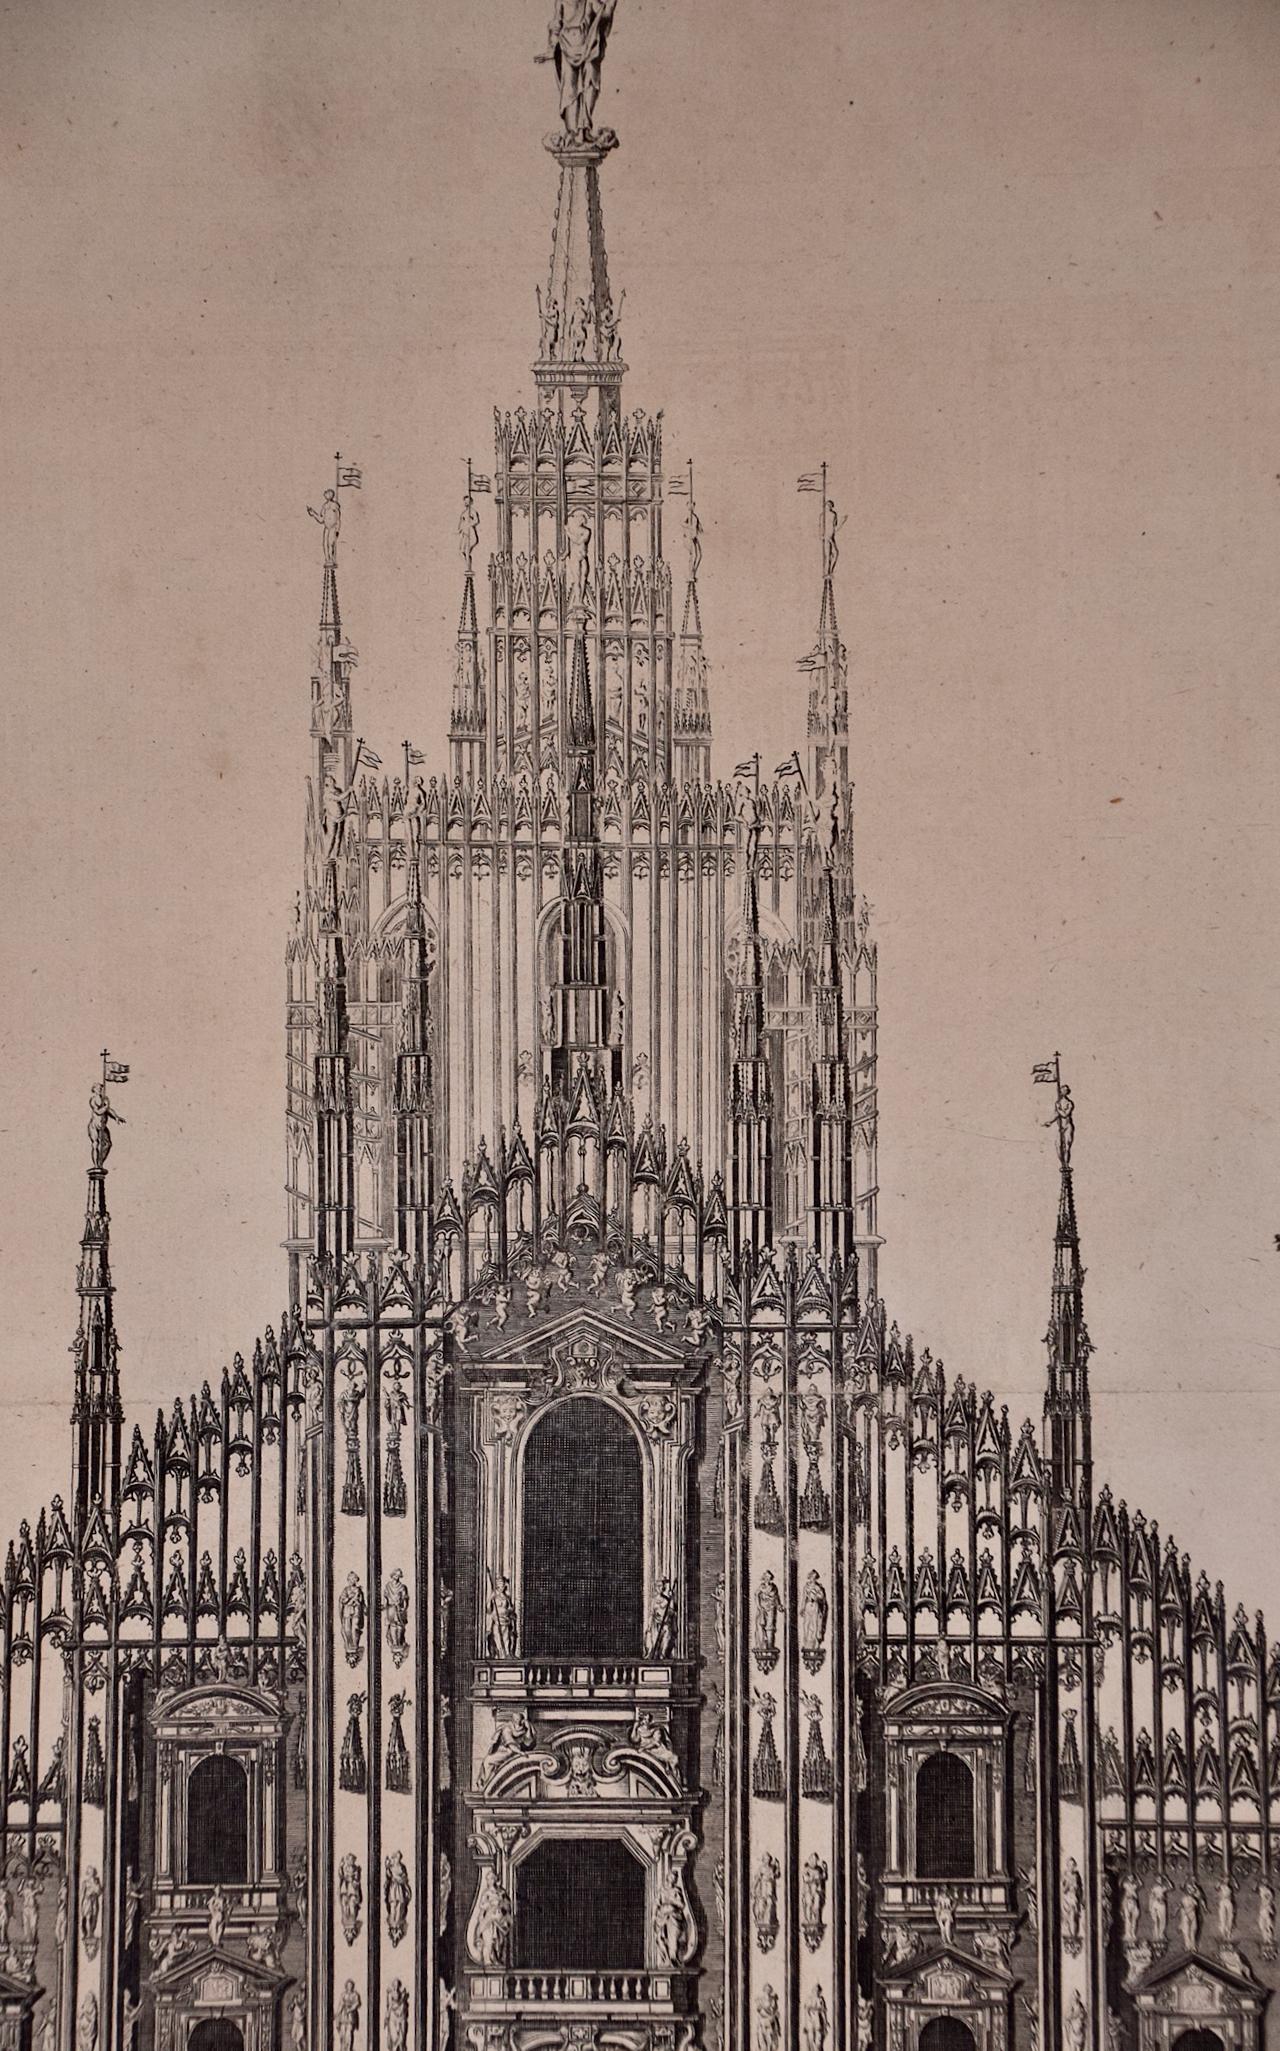 Milan Cathedral: A Framed 1704 Architectural Rendering by Mortier after Blaeu - Old Masters Print by Pierre Mortier